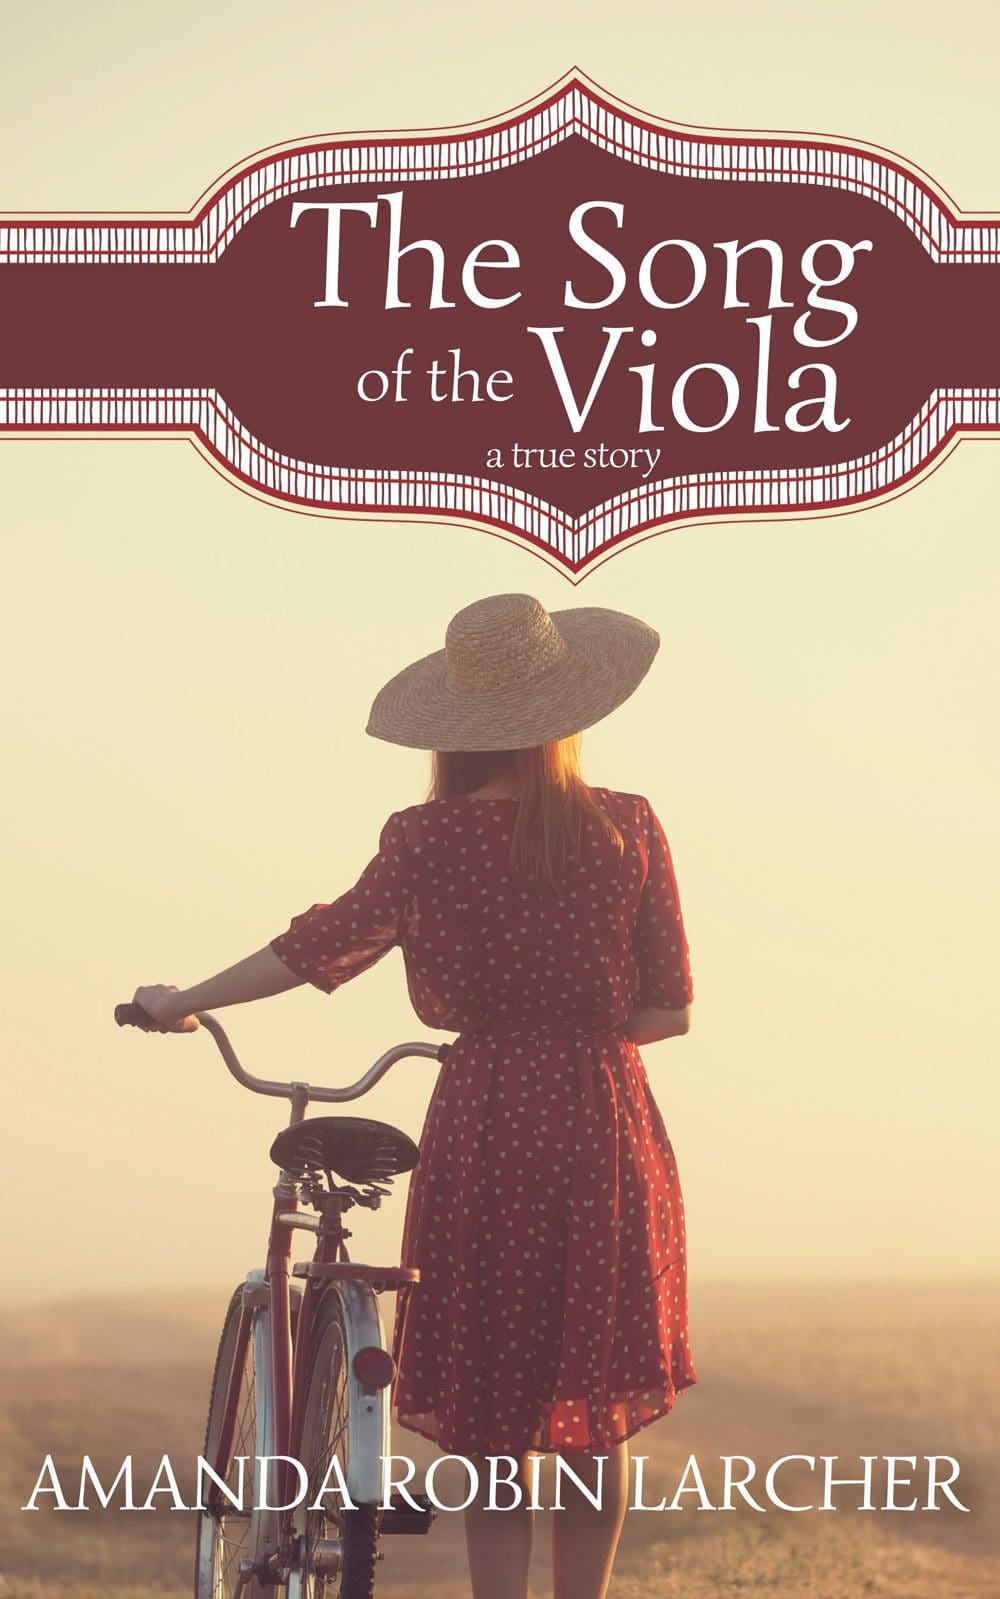 The Song of the Viola